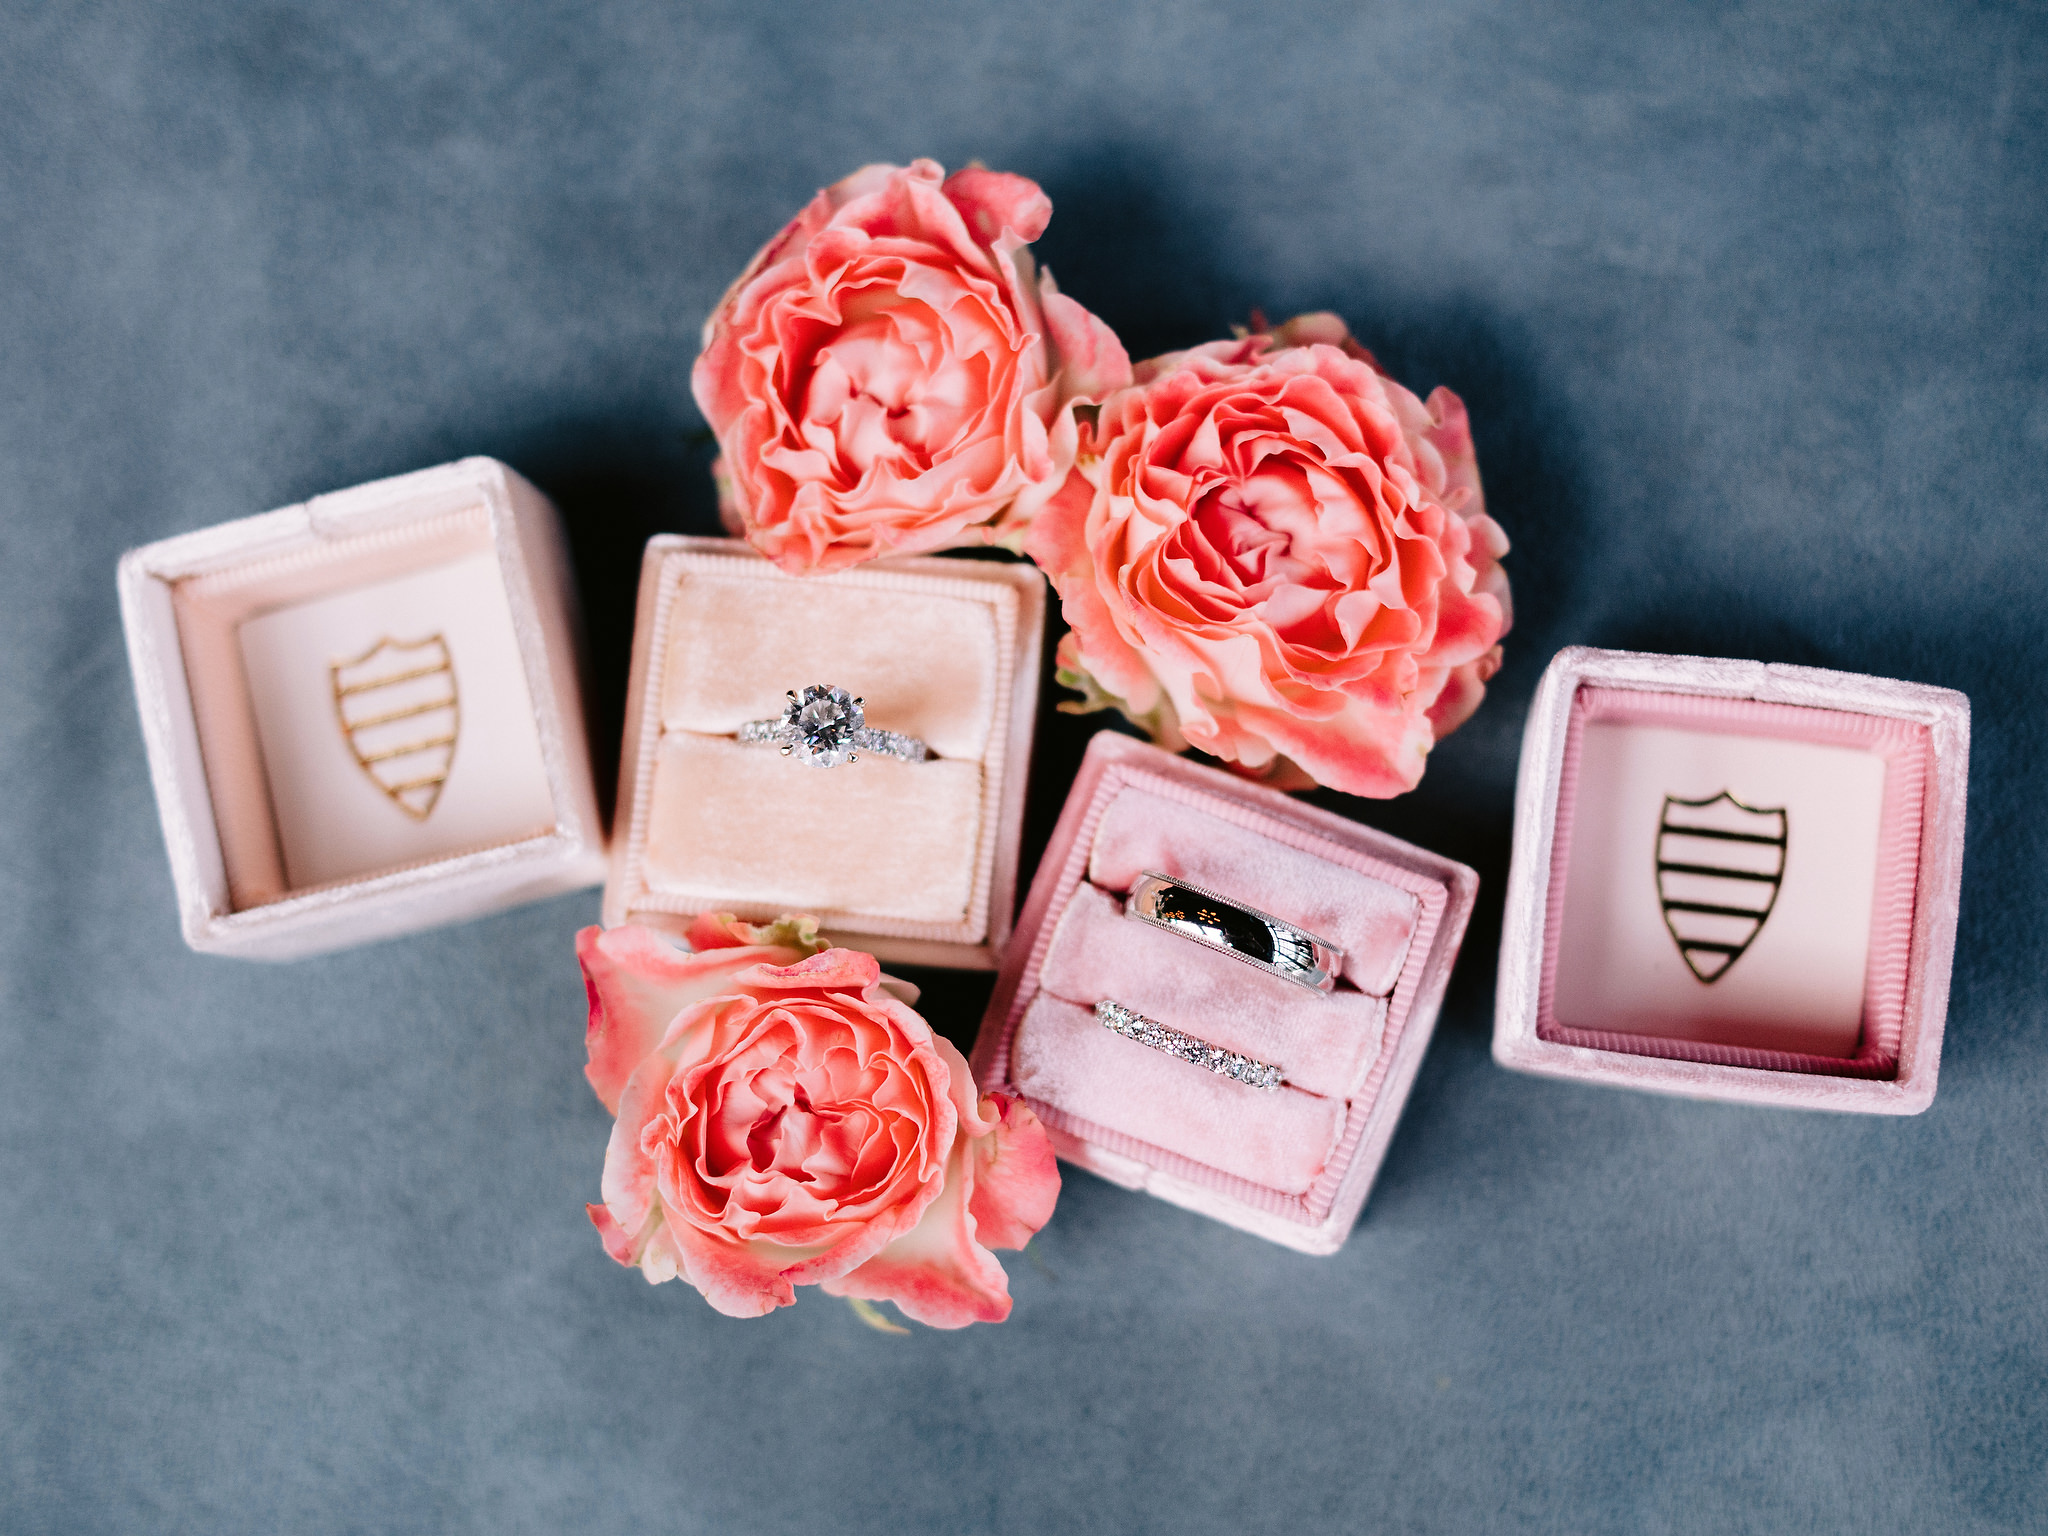 The diamond engagement ring and wedding bands are placed in pink boxes with pretty pink flowers on the sides. Image by Jenny Fu Studio